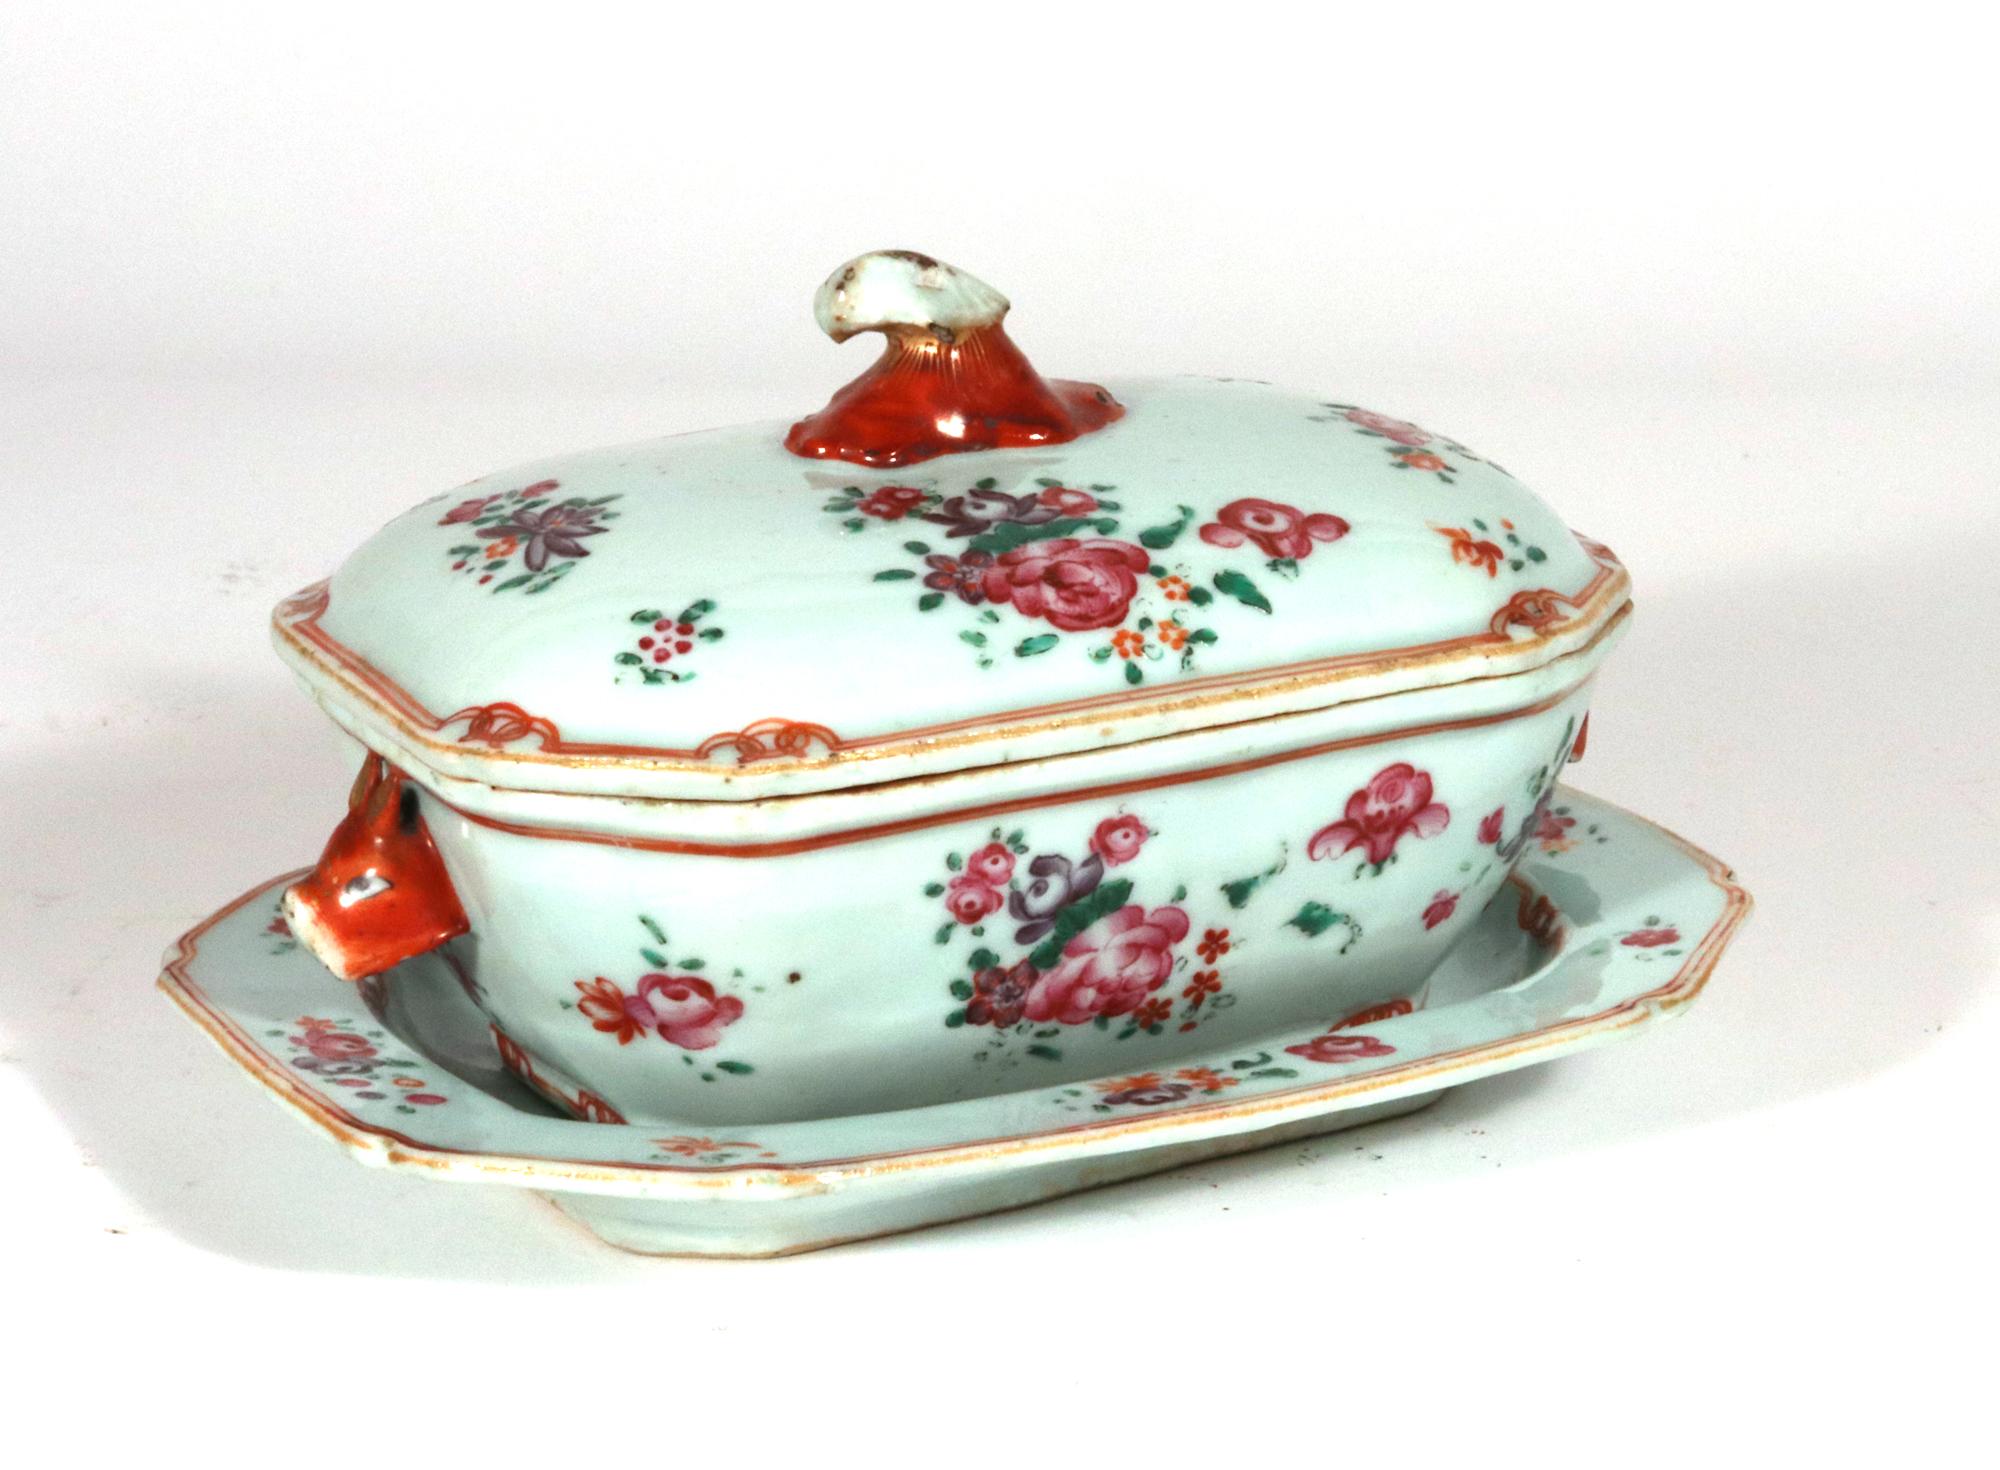 Chinese Export Porcelain Famille Rose Sauce Tureens, Covers & Stands For Sale 8